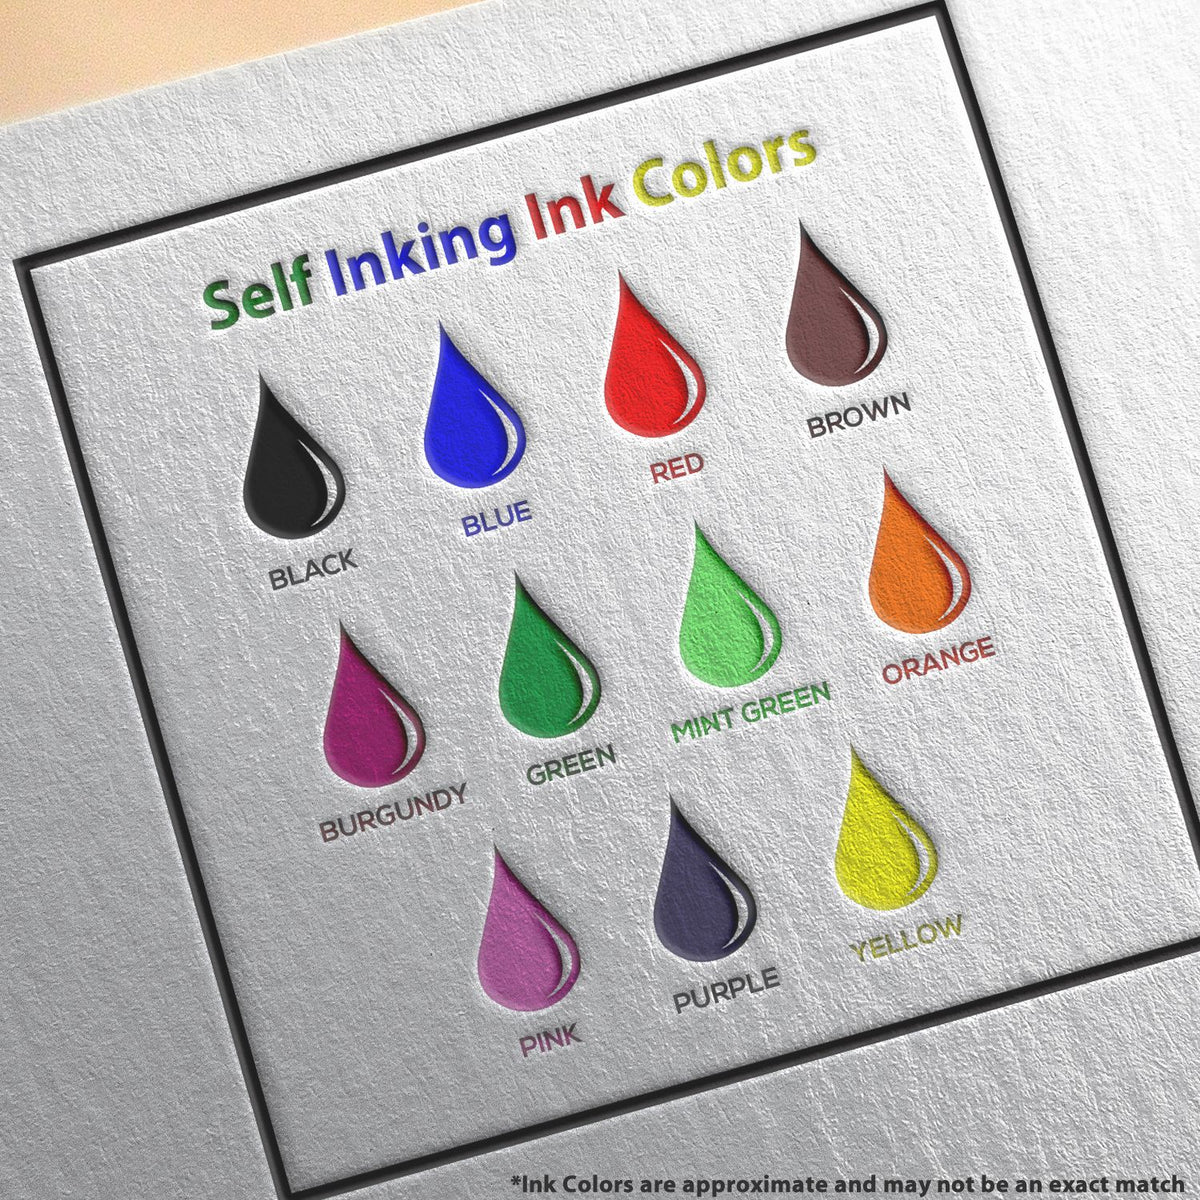 A picture showing the different ink colors or hues available for the Self-Inking Georgia PE Stamp product.